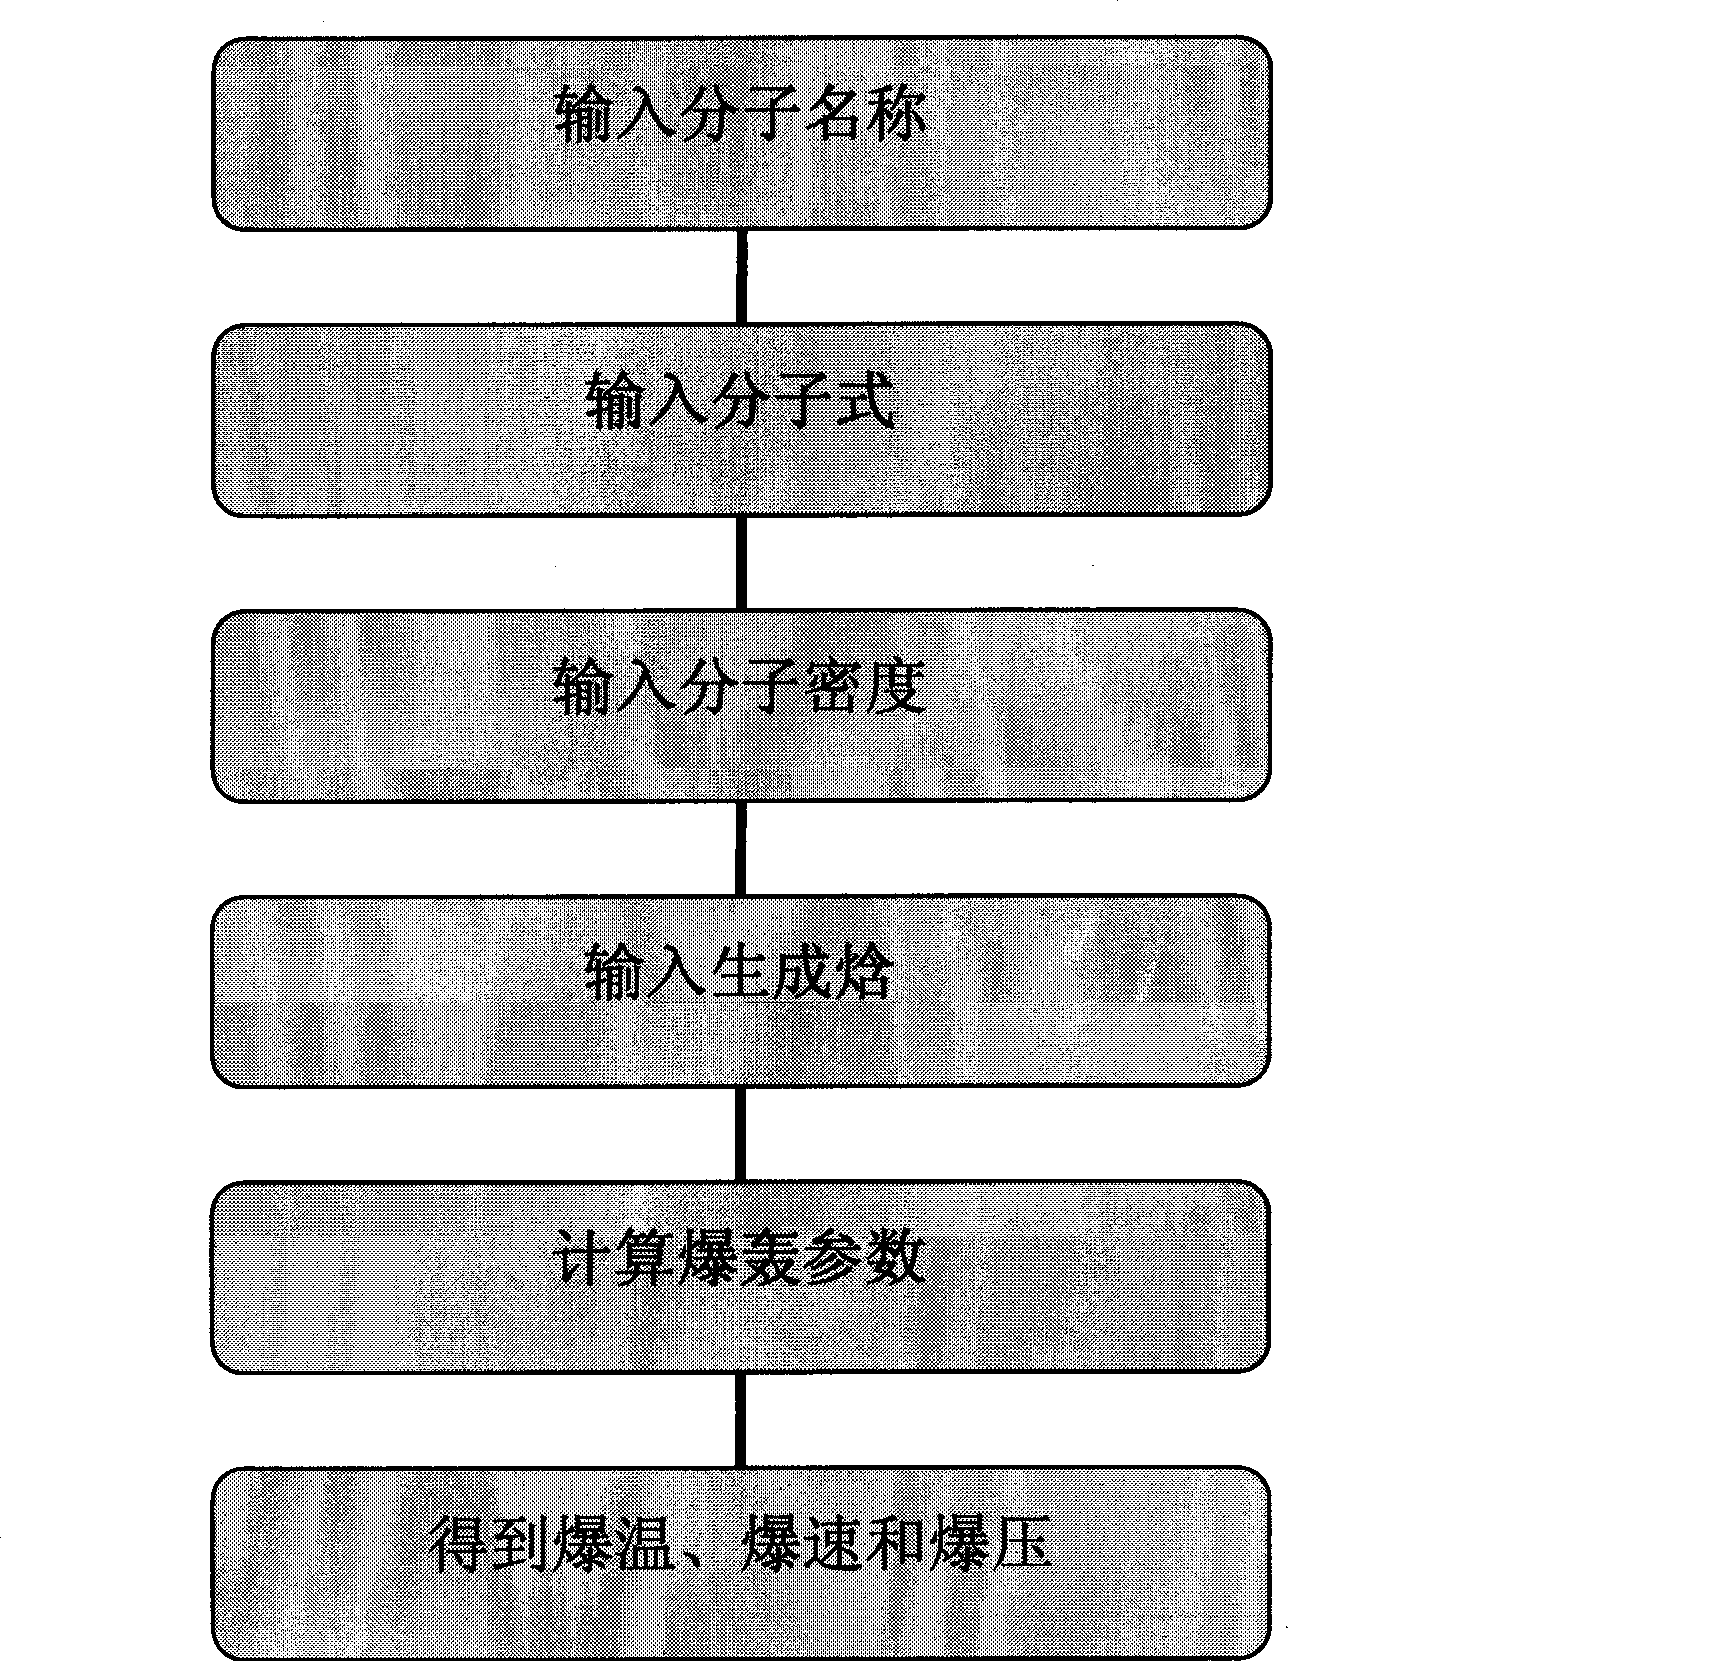 Computer-aided design system for energy-containing compound